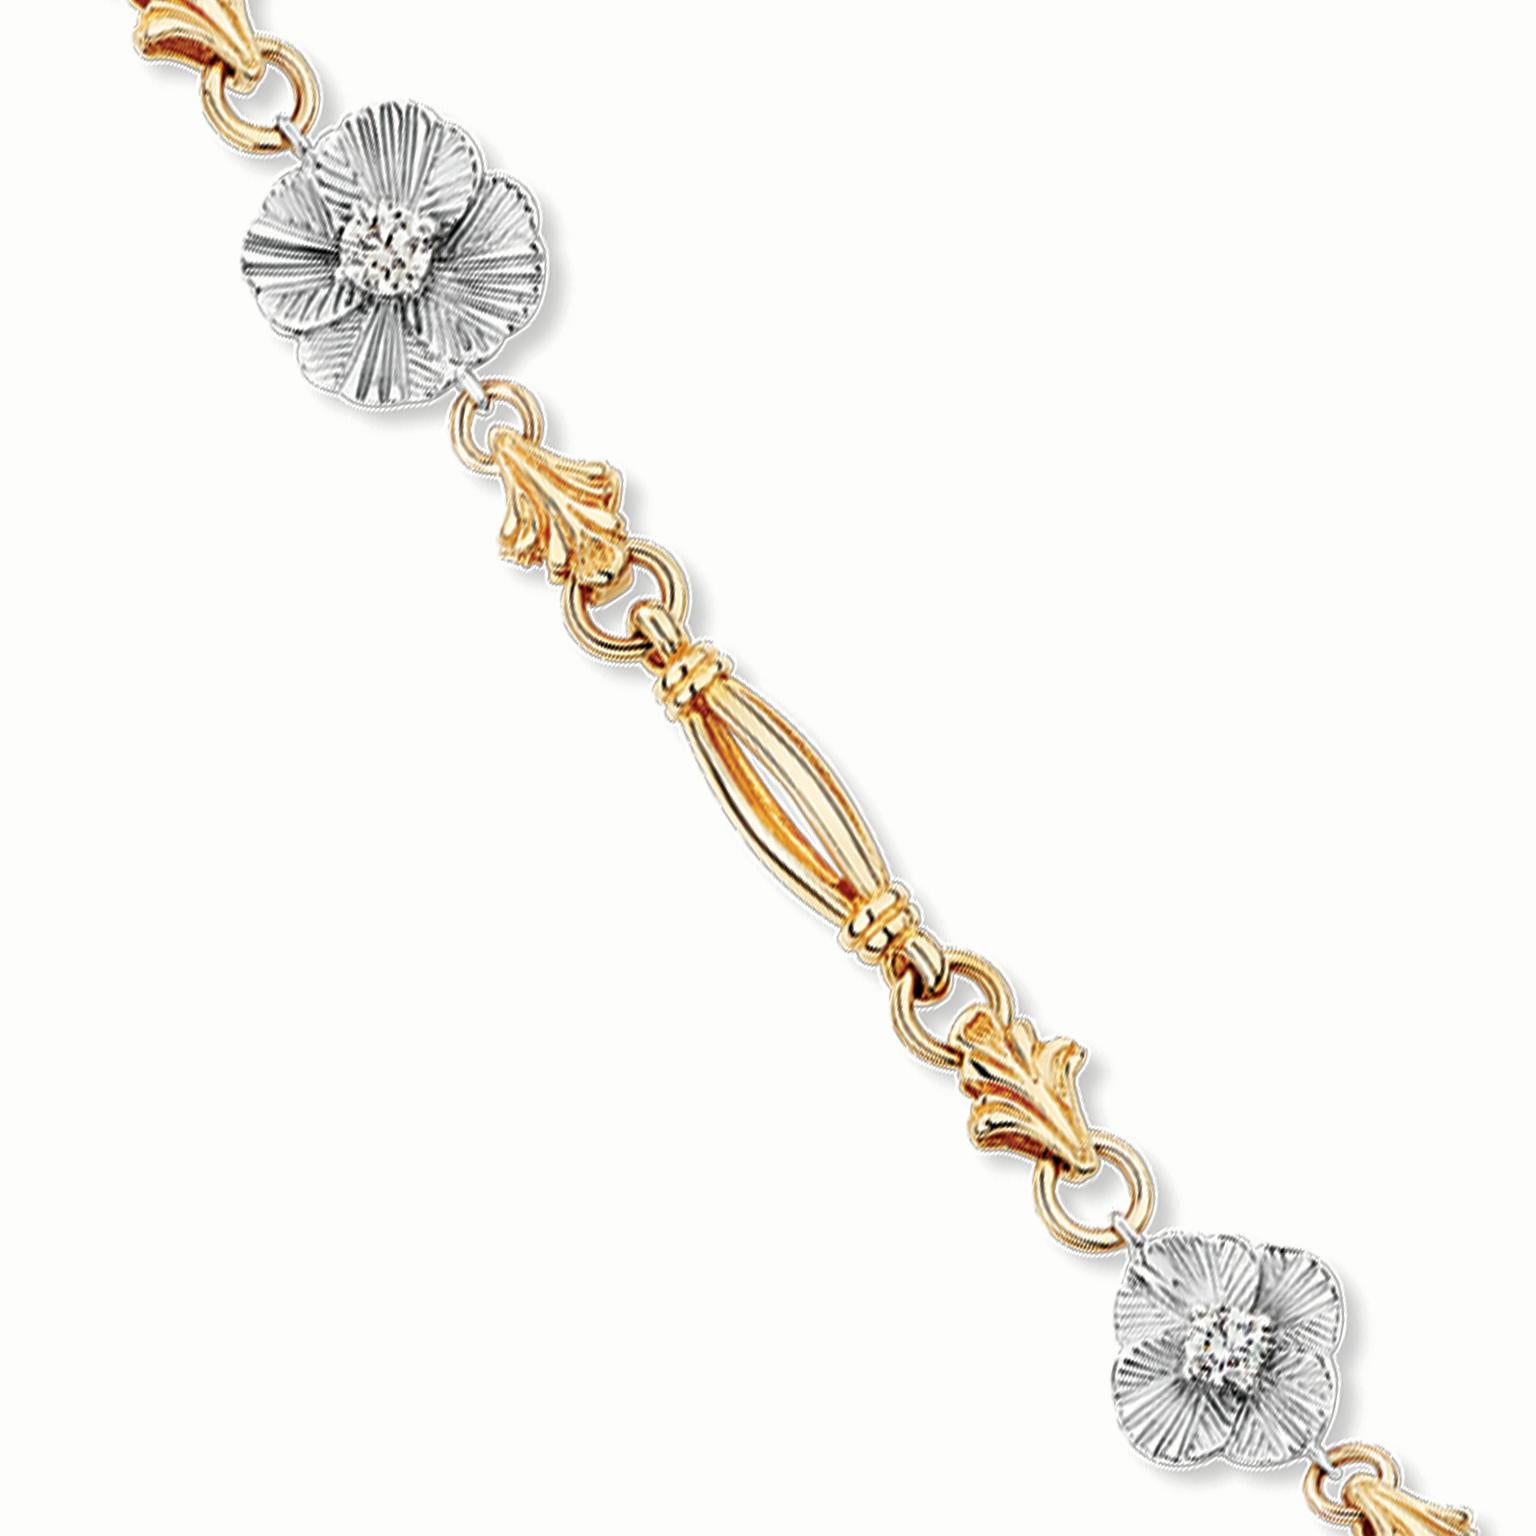 Paul Amey’s “Jasmin” shoulder (bra) strap is made in 9K yellow gold, silver and diamonds. The “Jasmin” flowers are solid silver with a small flower at each end with a 25pt round white diamond in each center and two larger flowers in the middle with